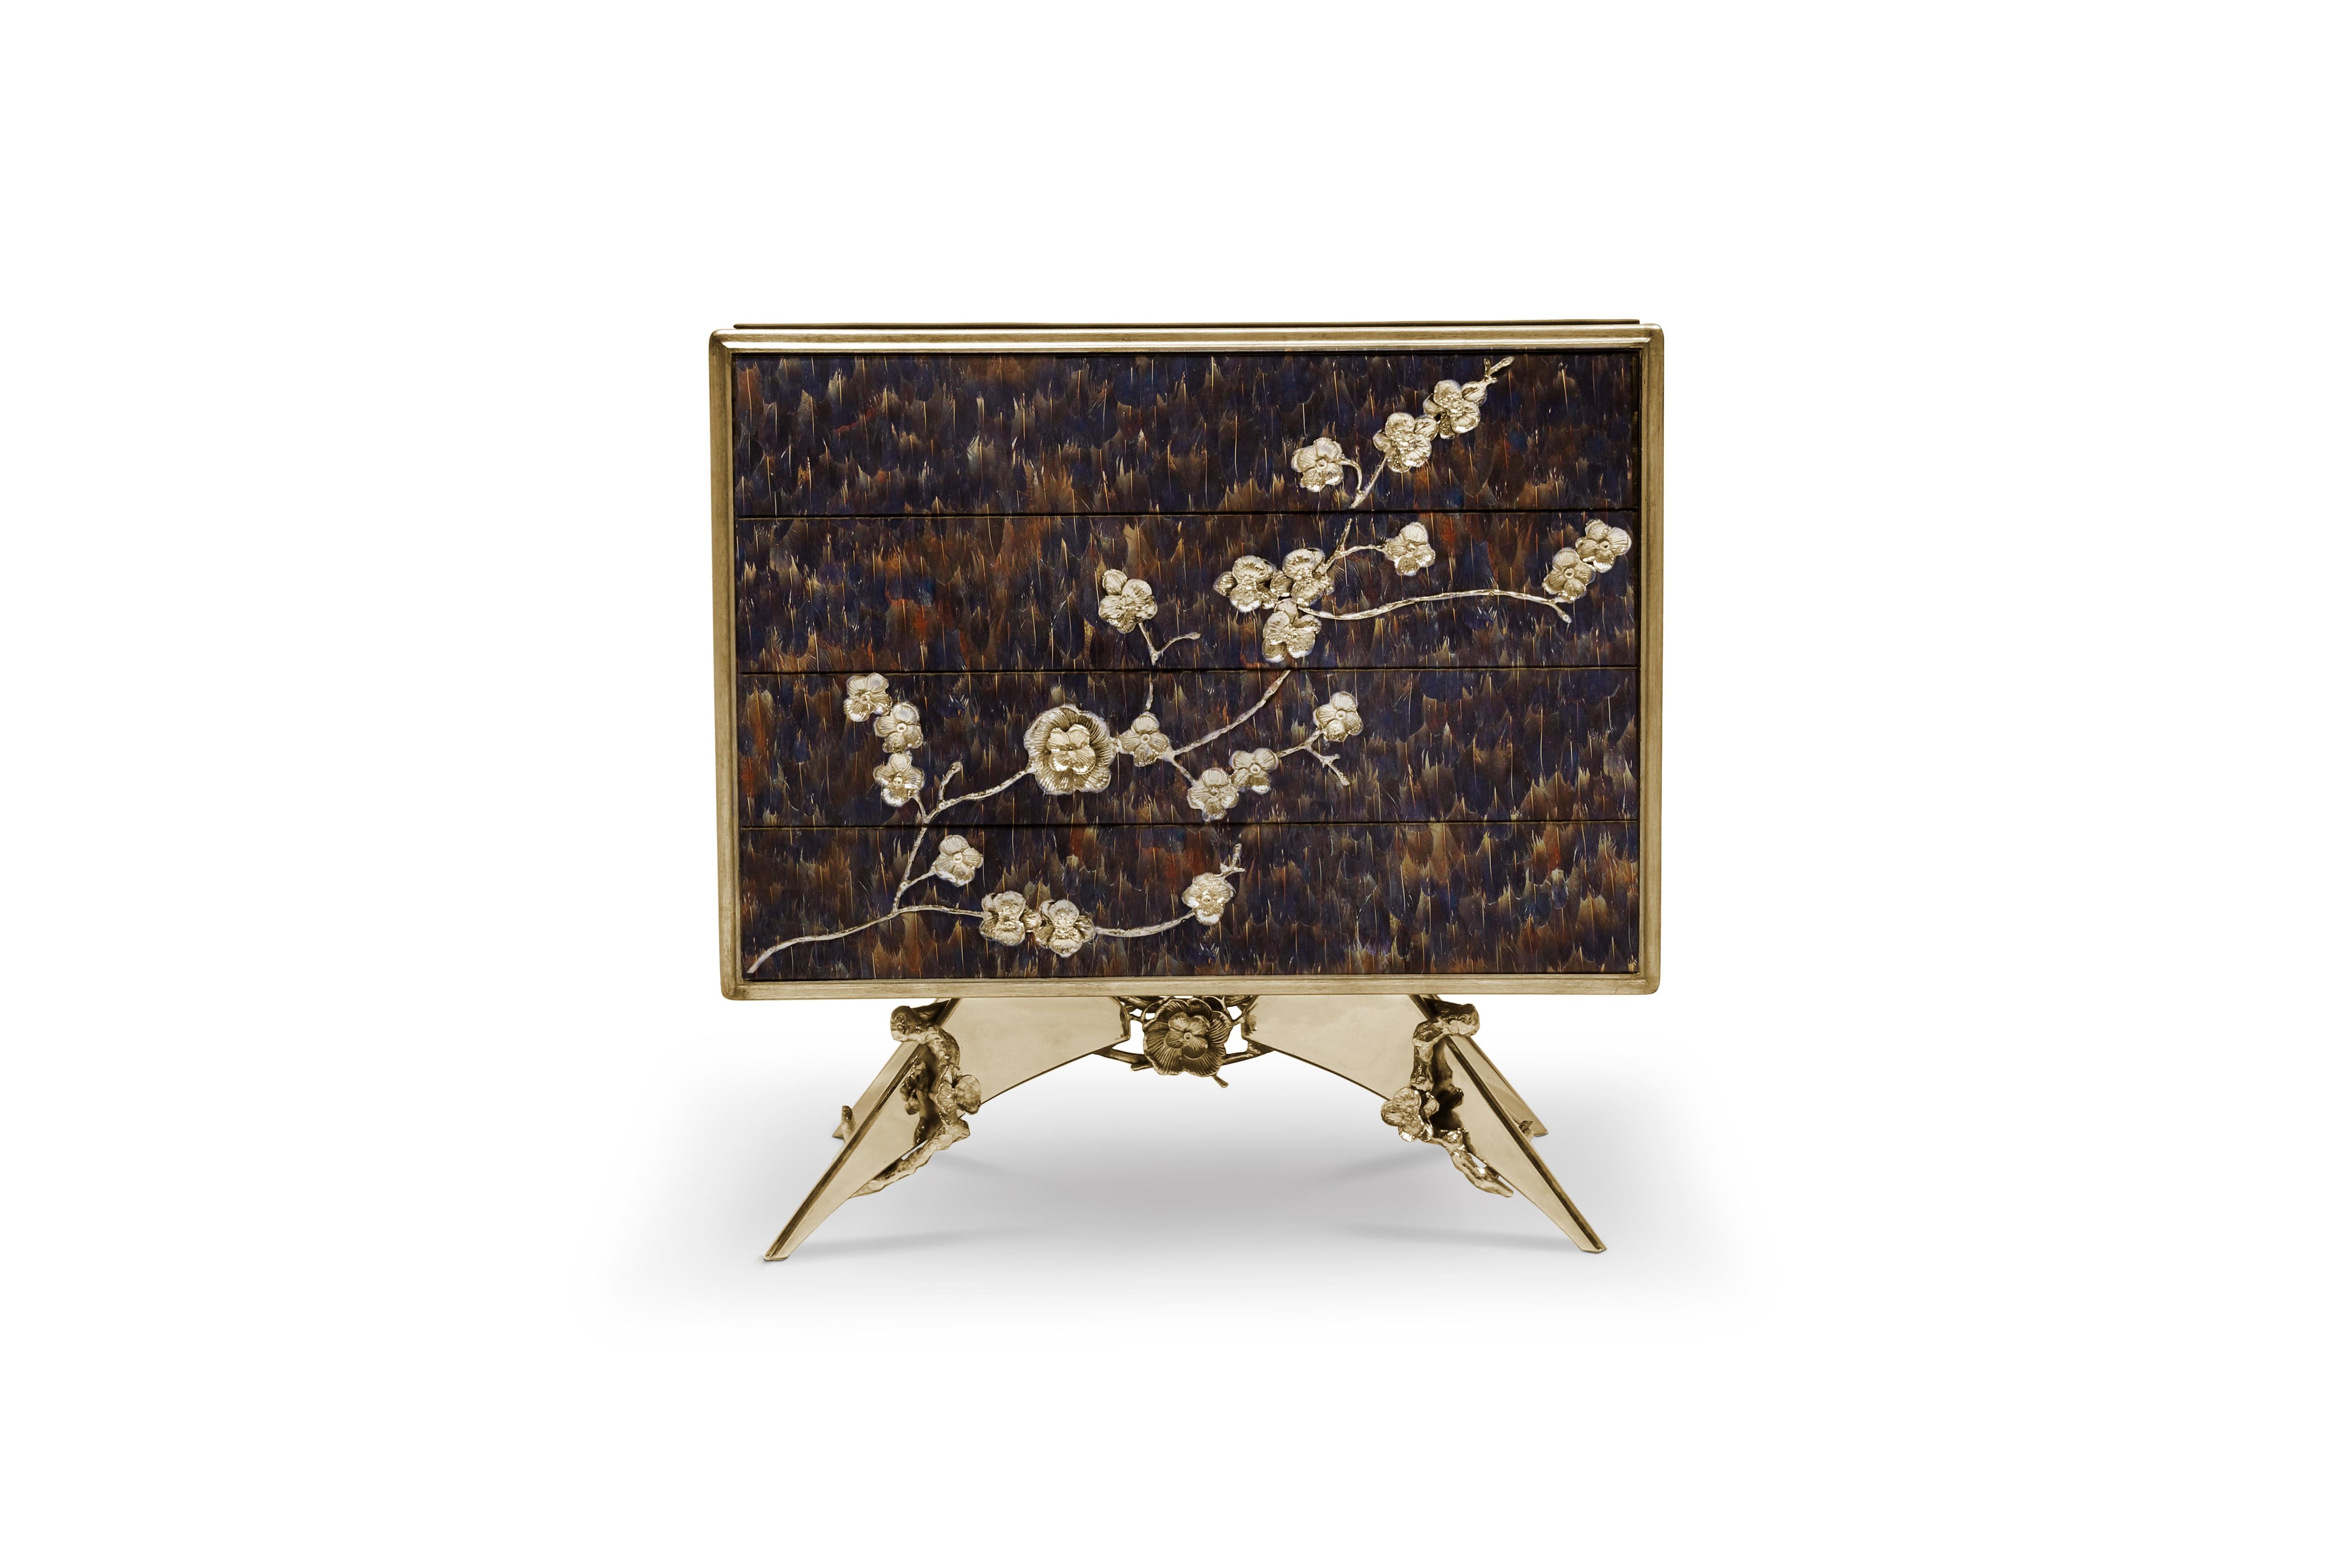 Portuguese Contemporary Spellbound Nightstand In High Gloss Lacquer and Adorns by Koket For Sale